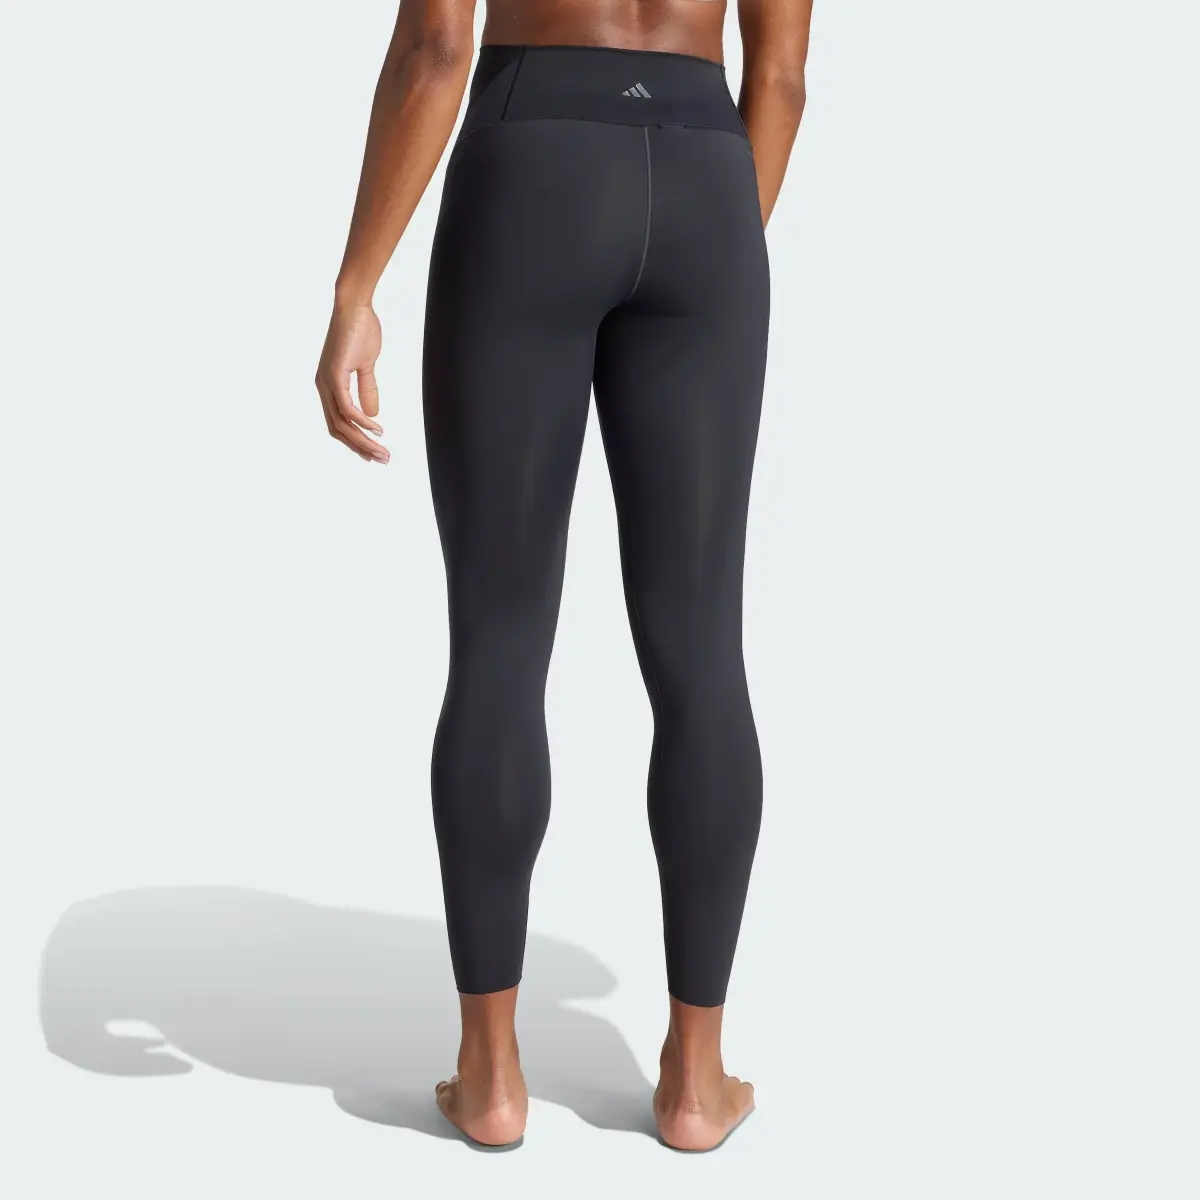 Adidas All Me Luxe 7/8 Leggings. 2